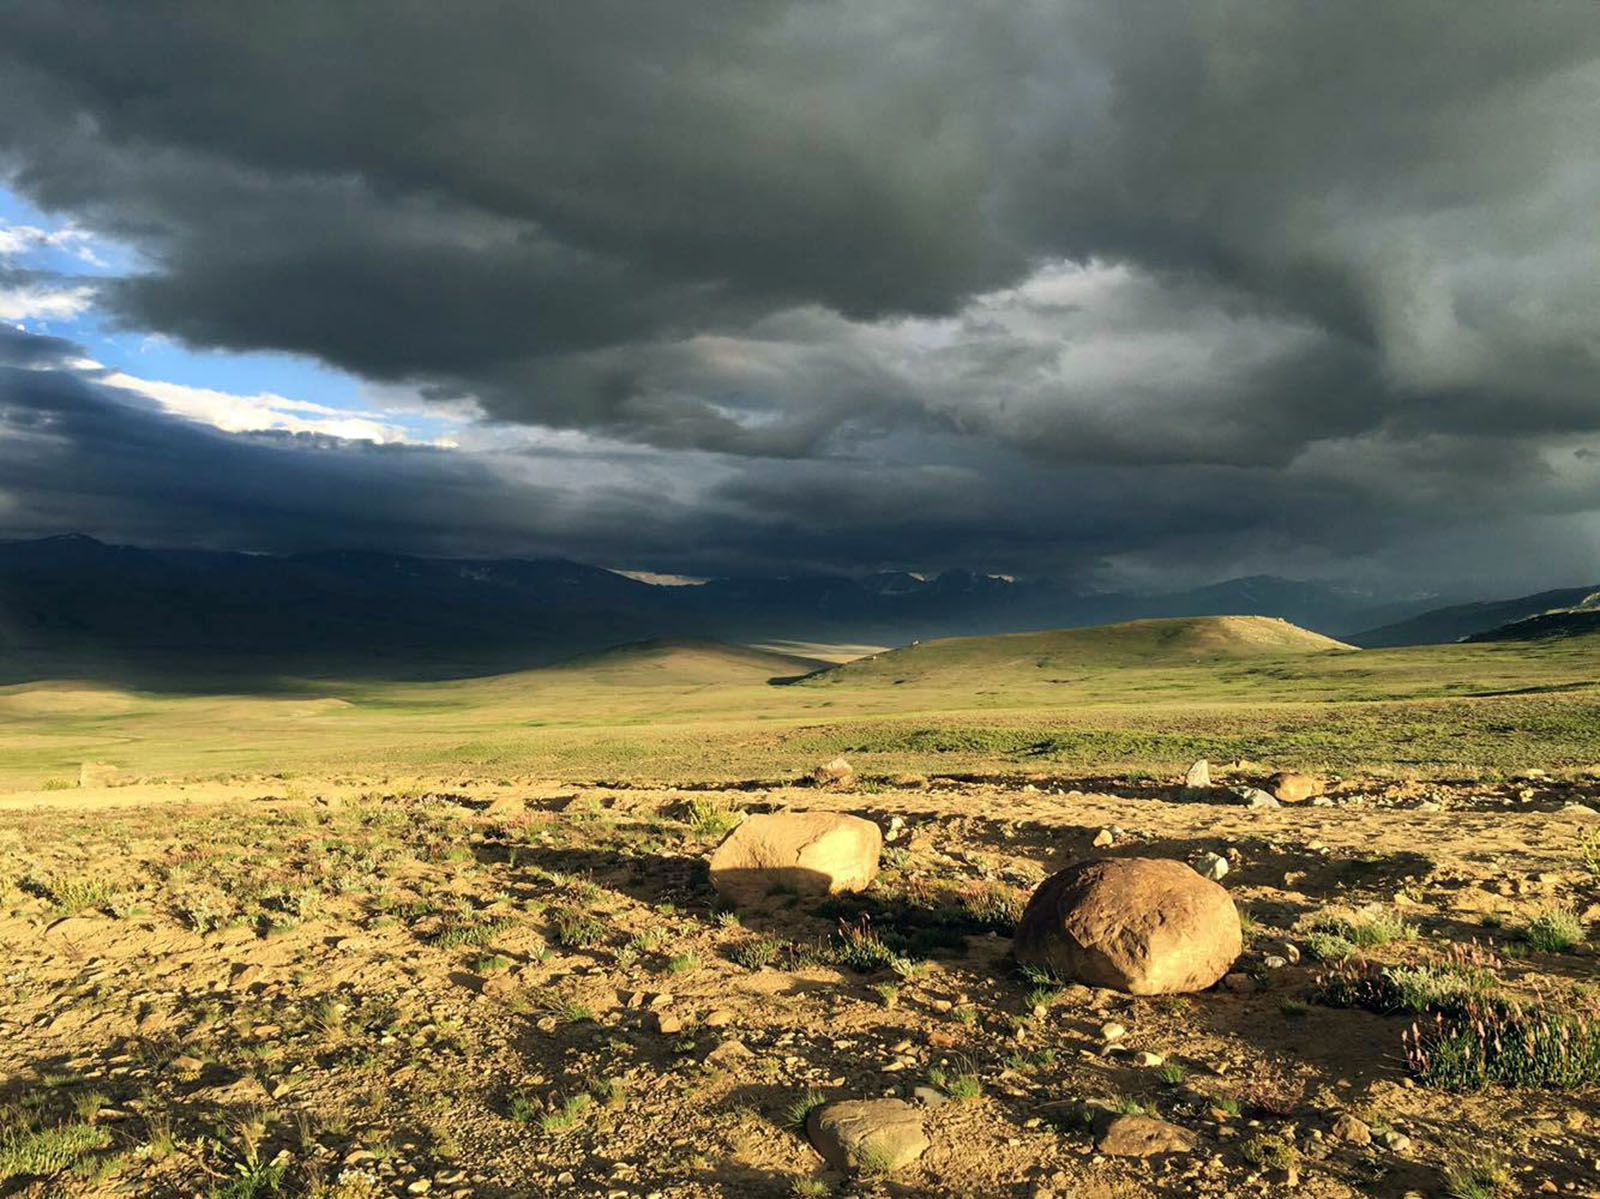 'Only fools go to Deosai'